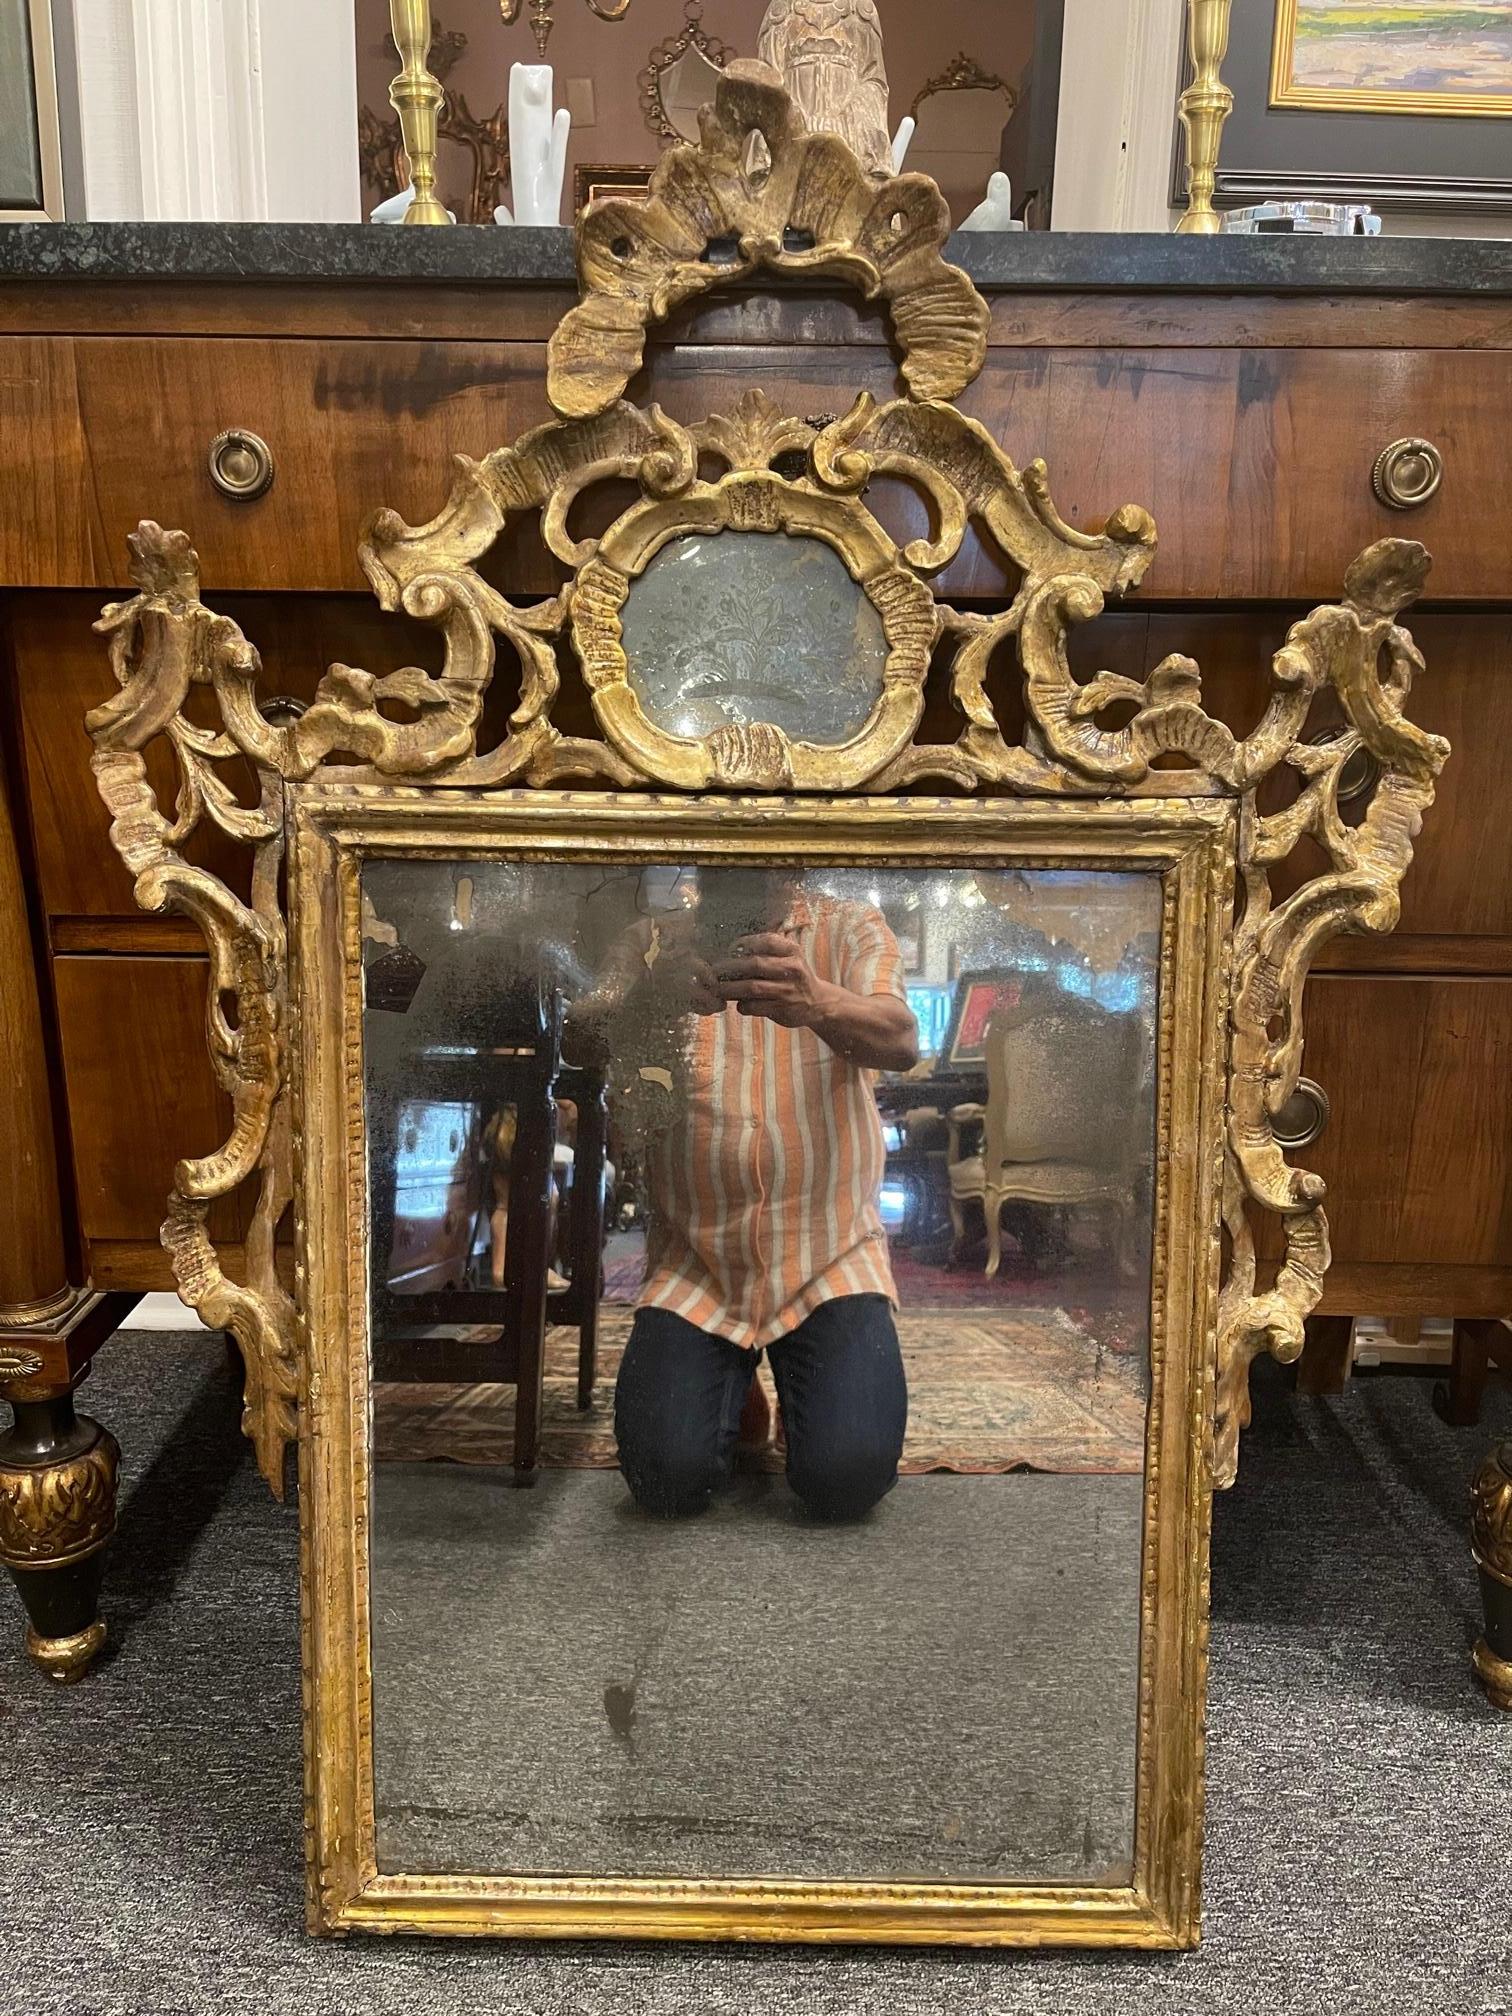 Italian Rococo giltwood wall mirror, 18th century; large open work crest. Small etched mirror panel above main mirror panel.